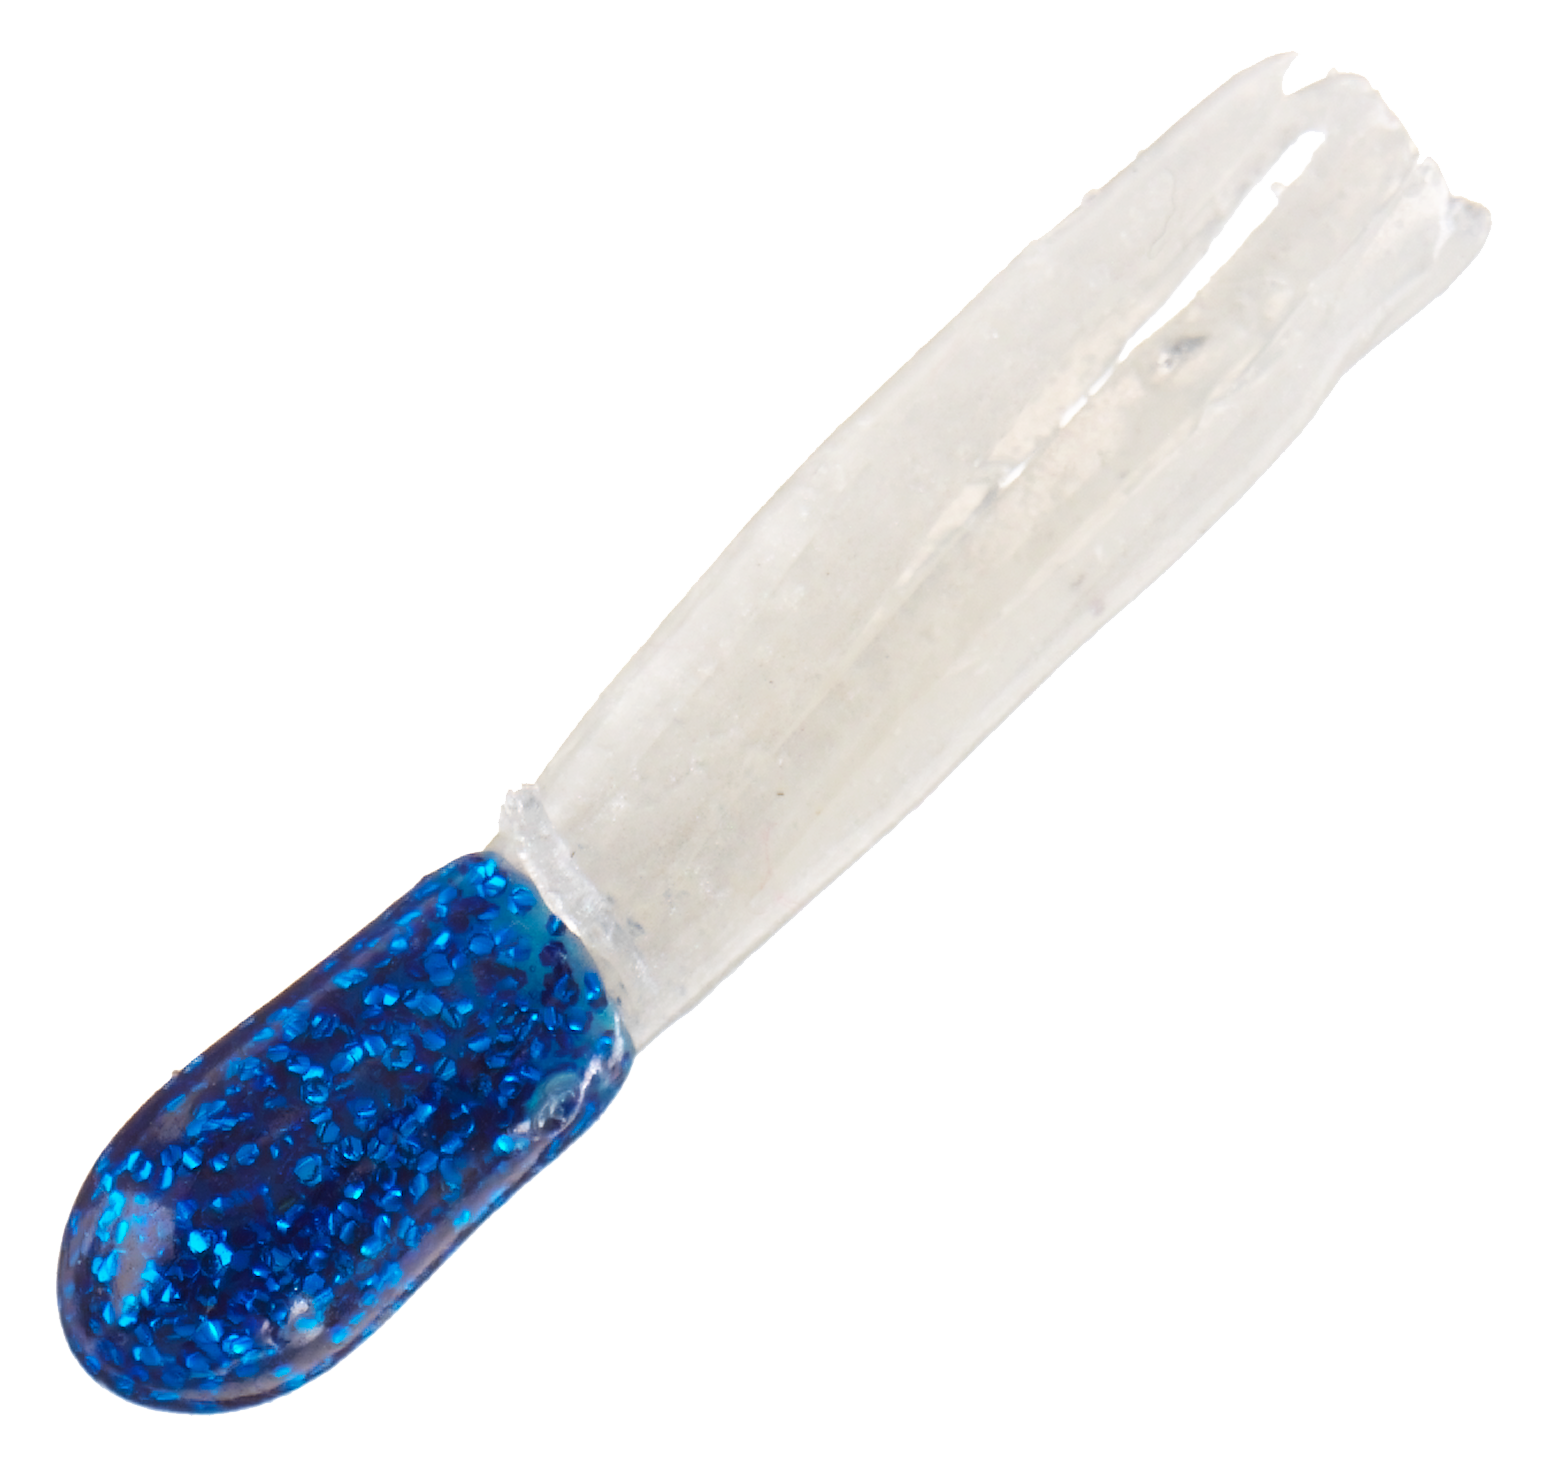 Bass Pro Shops Sparkle Squirts - 1-1/2"" - 15 pack - Electric Blue/White